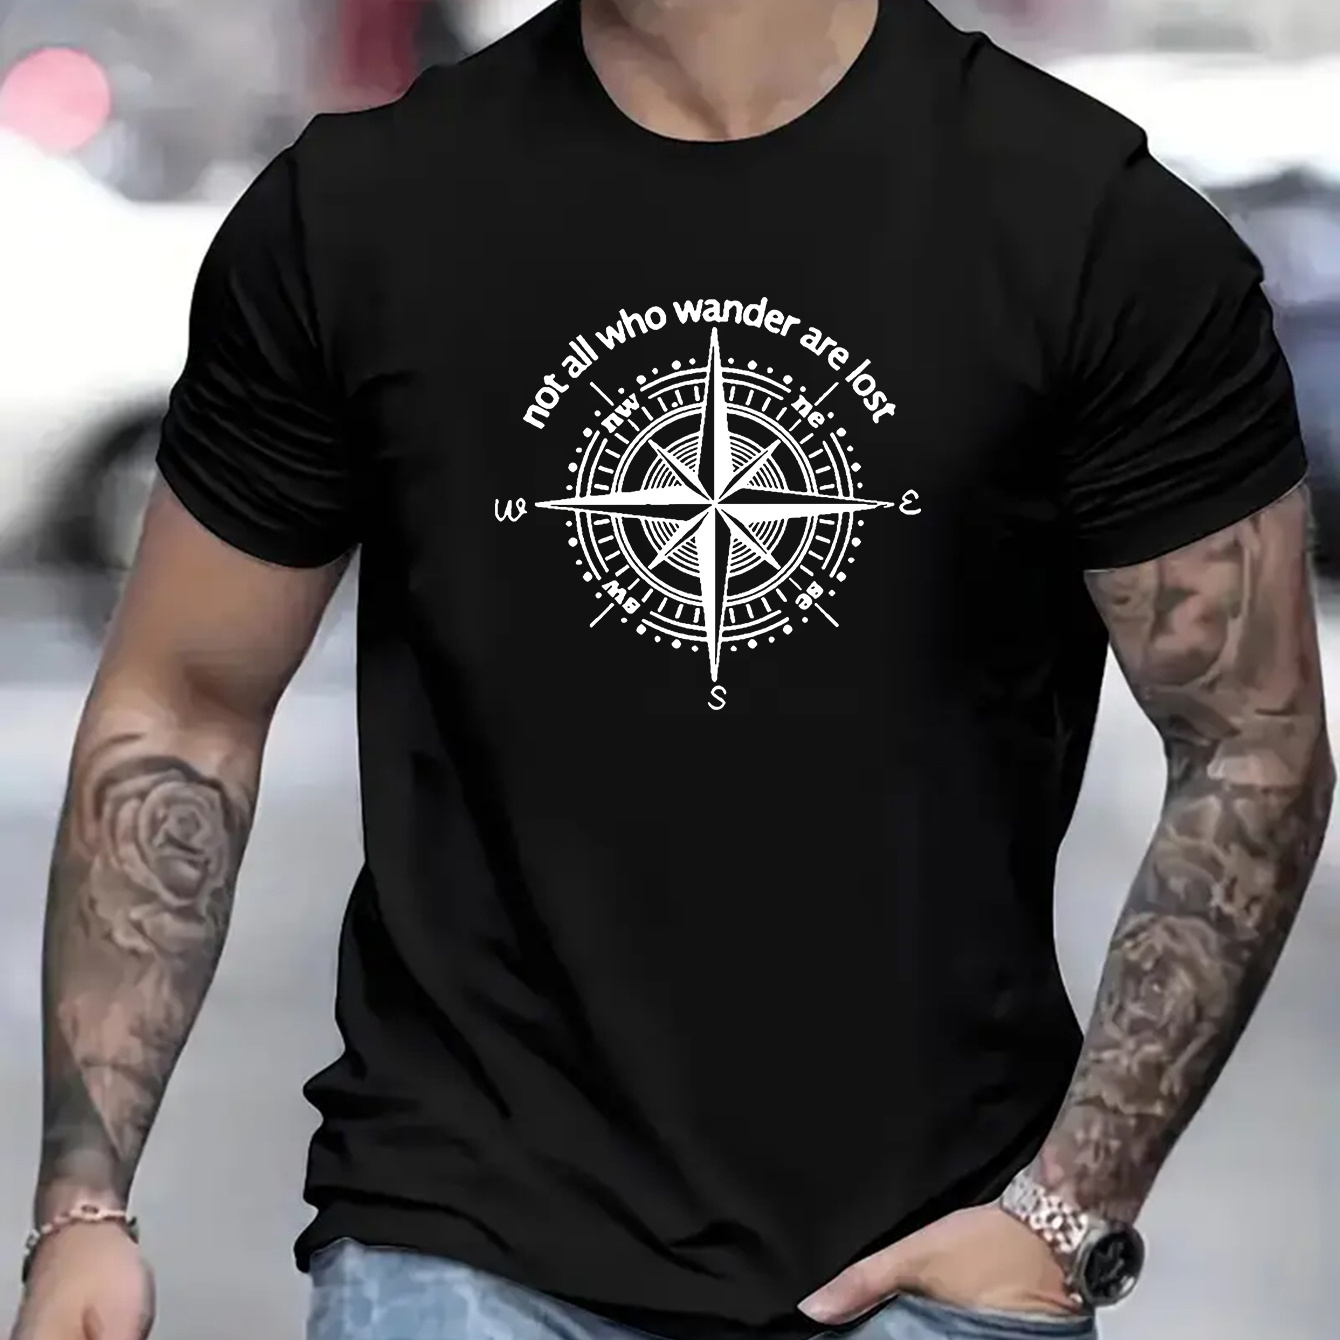 

Letters And Cartoon Compass Graphic Print, Men's Casual Fit T-shirt, Cool Tee Top Clothes For Men For Summer For Everyday Activities